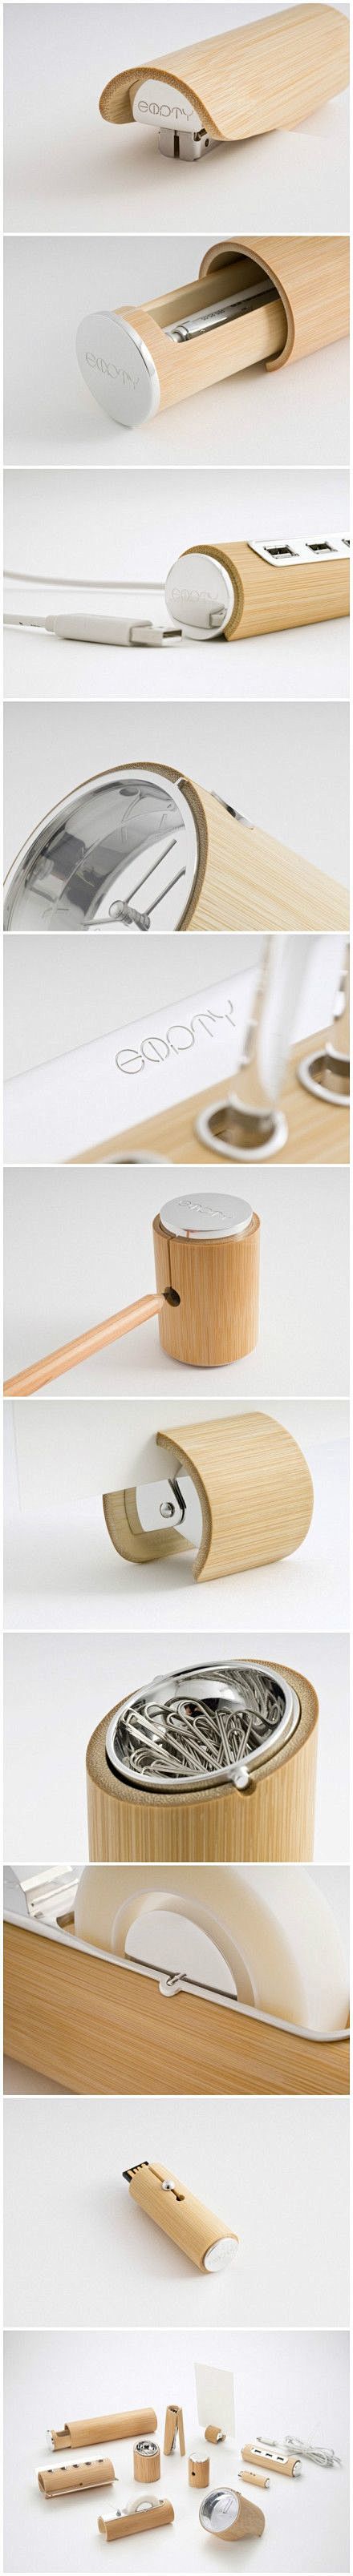 bamboo products: 